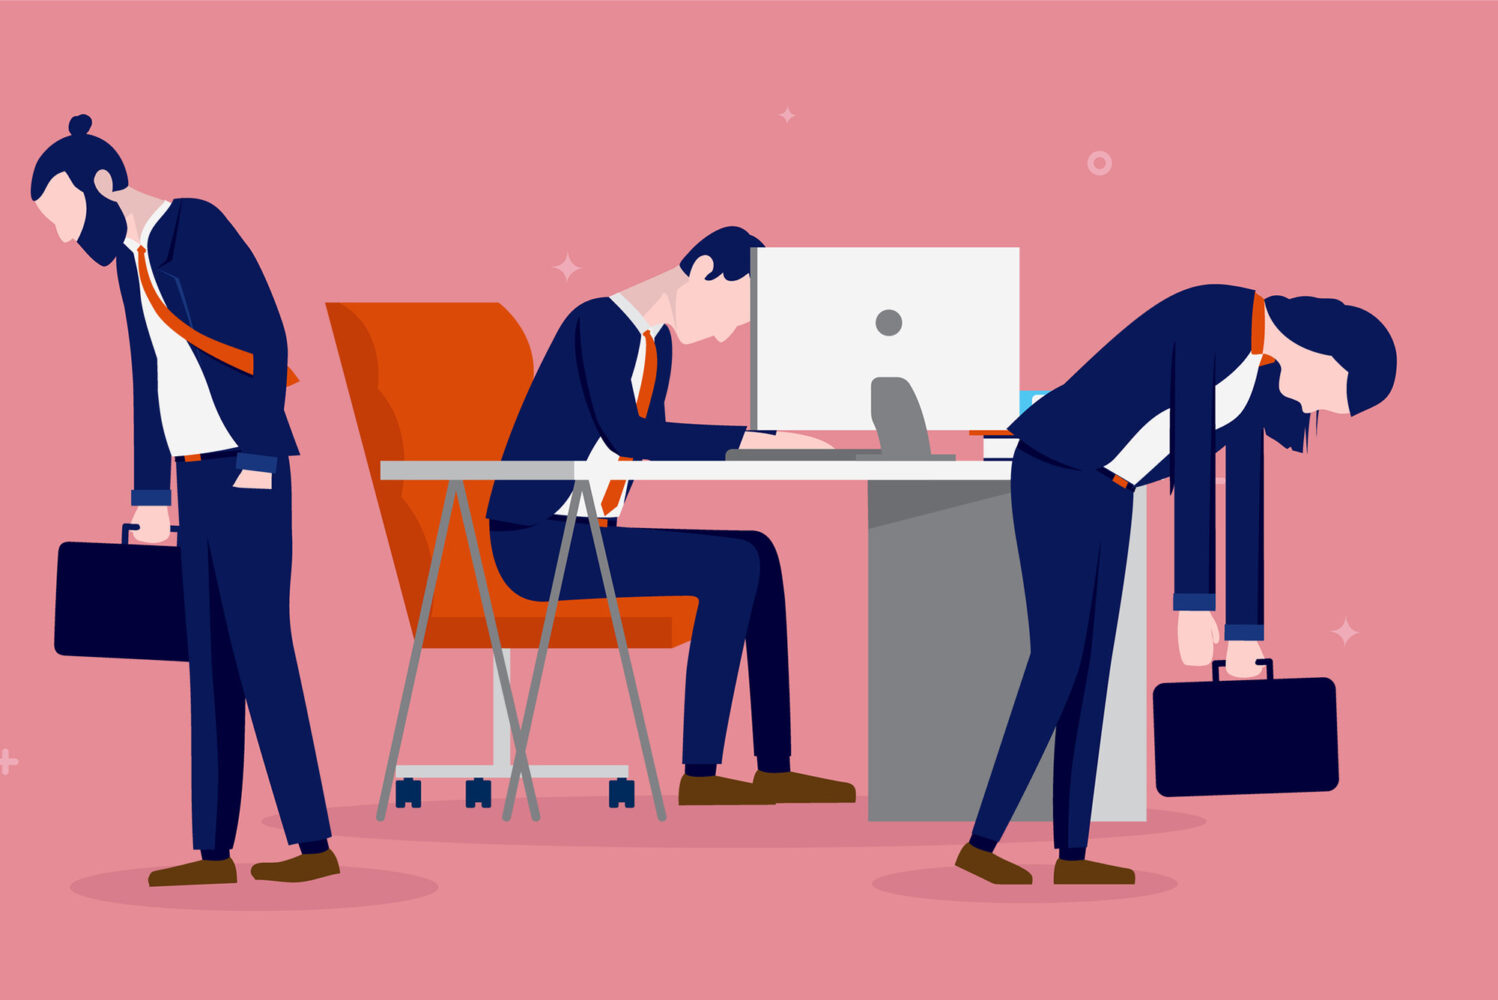 Photo: A drawing of three workers looking depressed. One in the middle sits at a desk, slumped in front of a computer. The other two are walking in opposite directions with suitcases